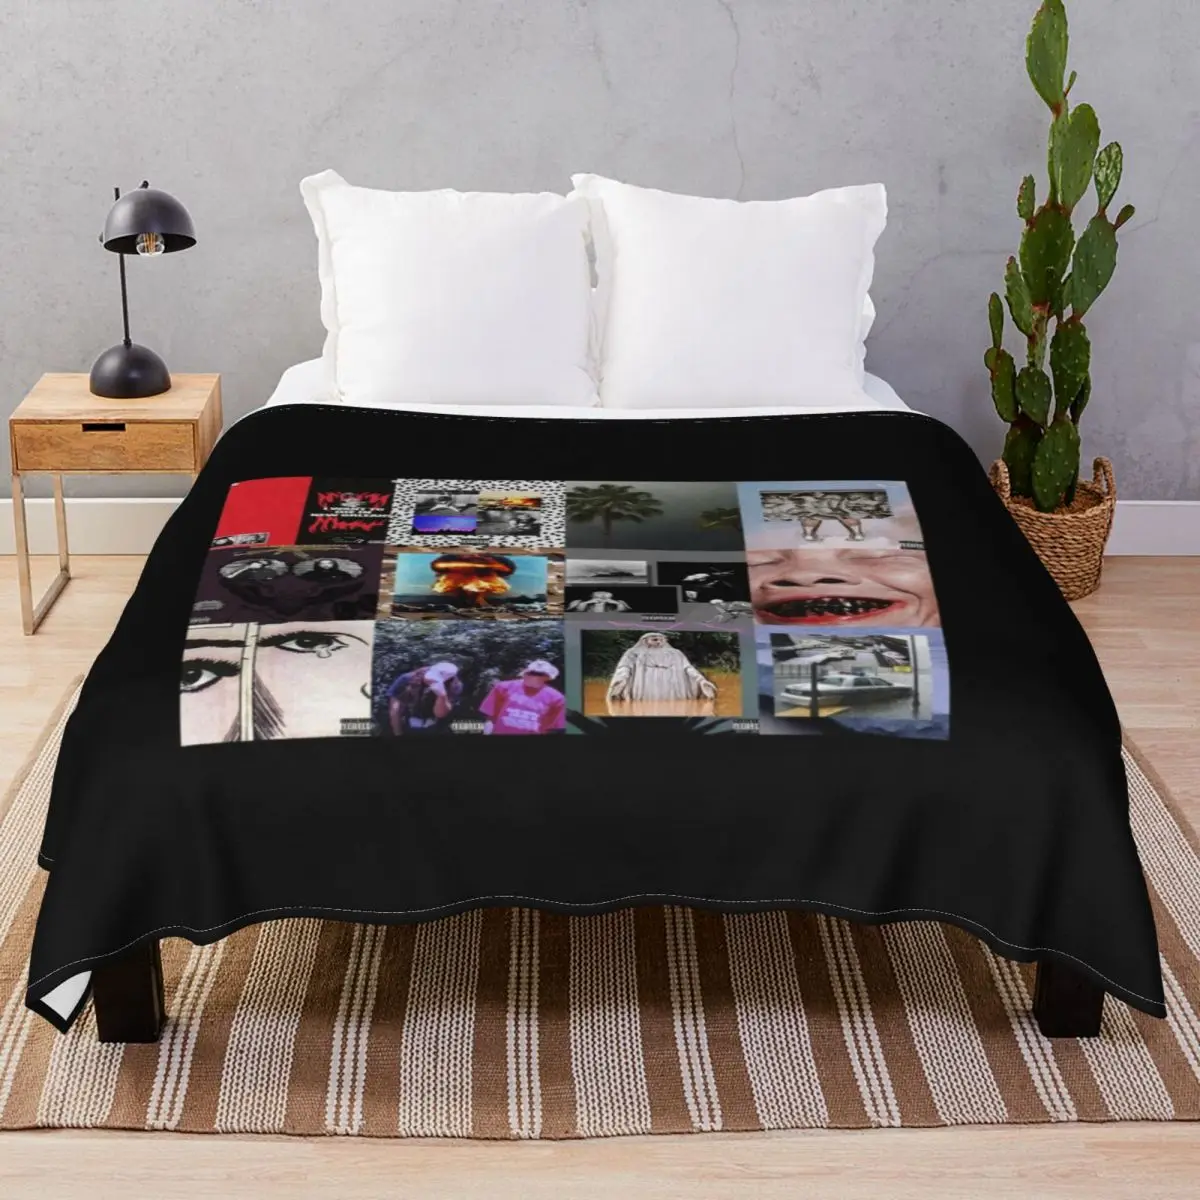 Suicide Boys Album Collage Blankets Flannel Decoration Multifunction Unisex Throw Blanket for Bed Sofa Camp Cinema